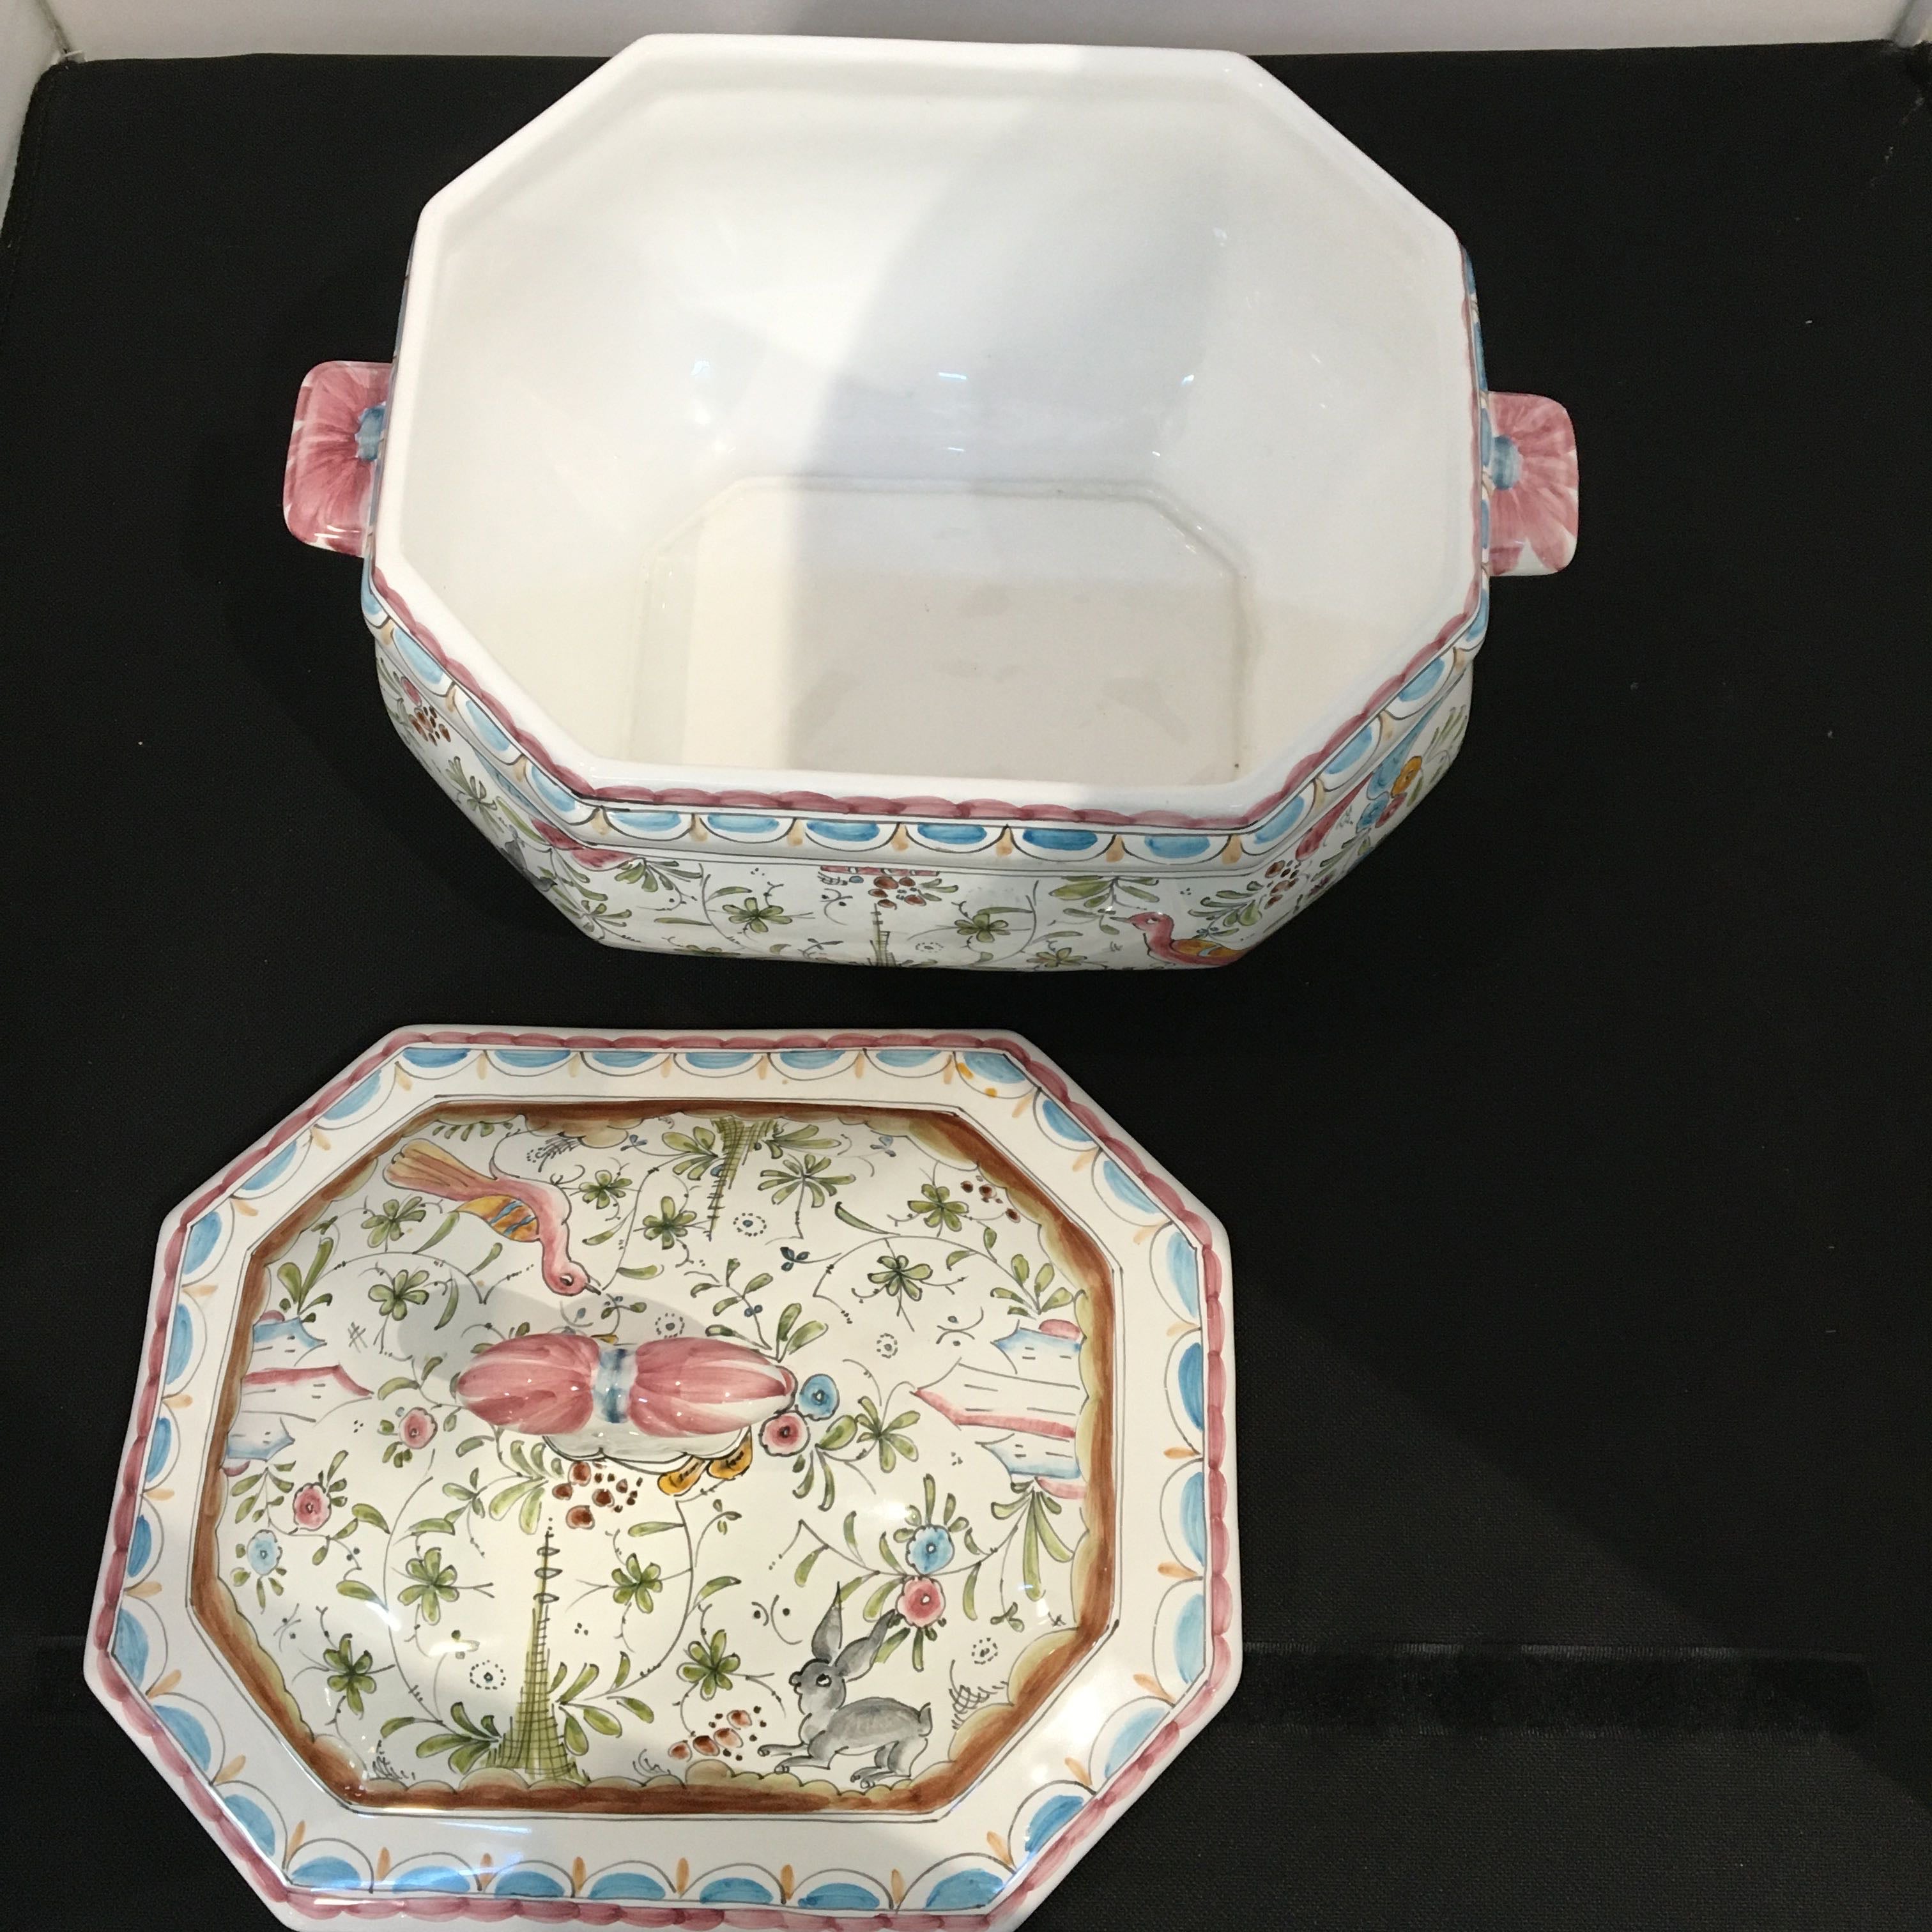 10"x 6"x 9" Covered Pedestal Portuguese Hand Painted Serving Dish